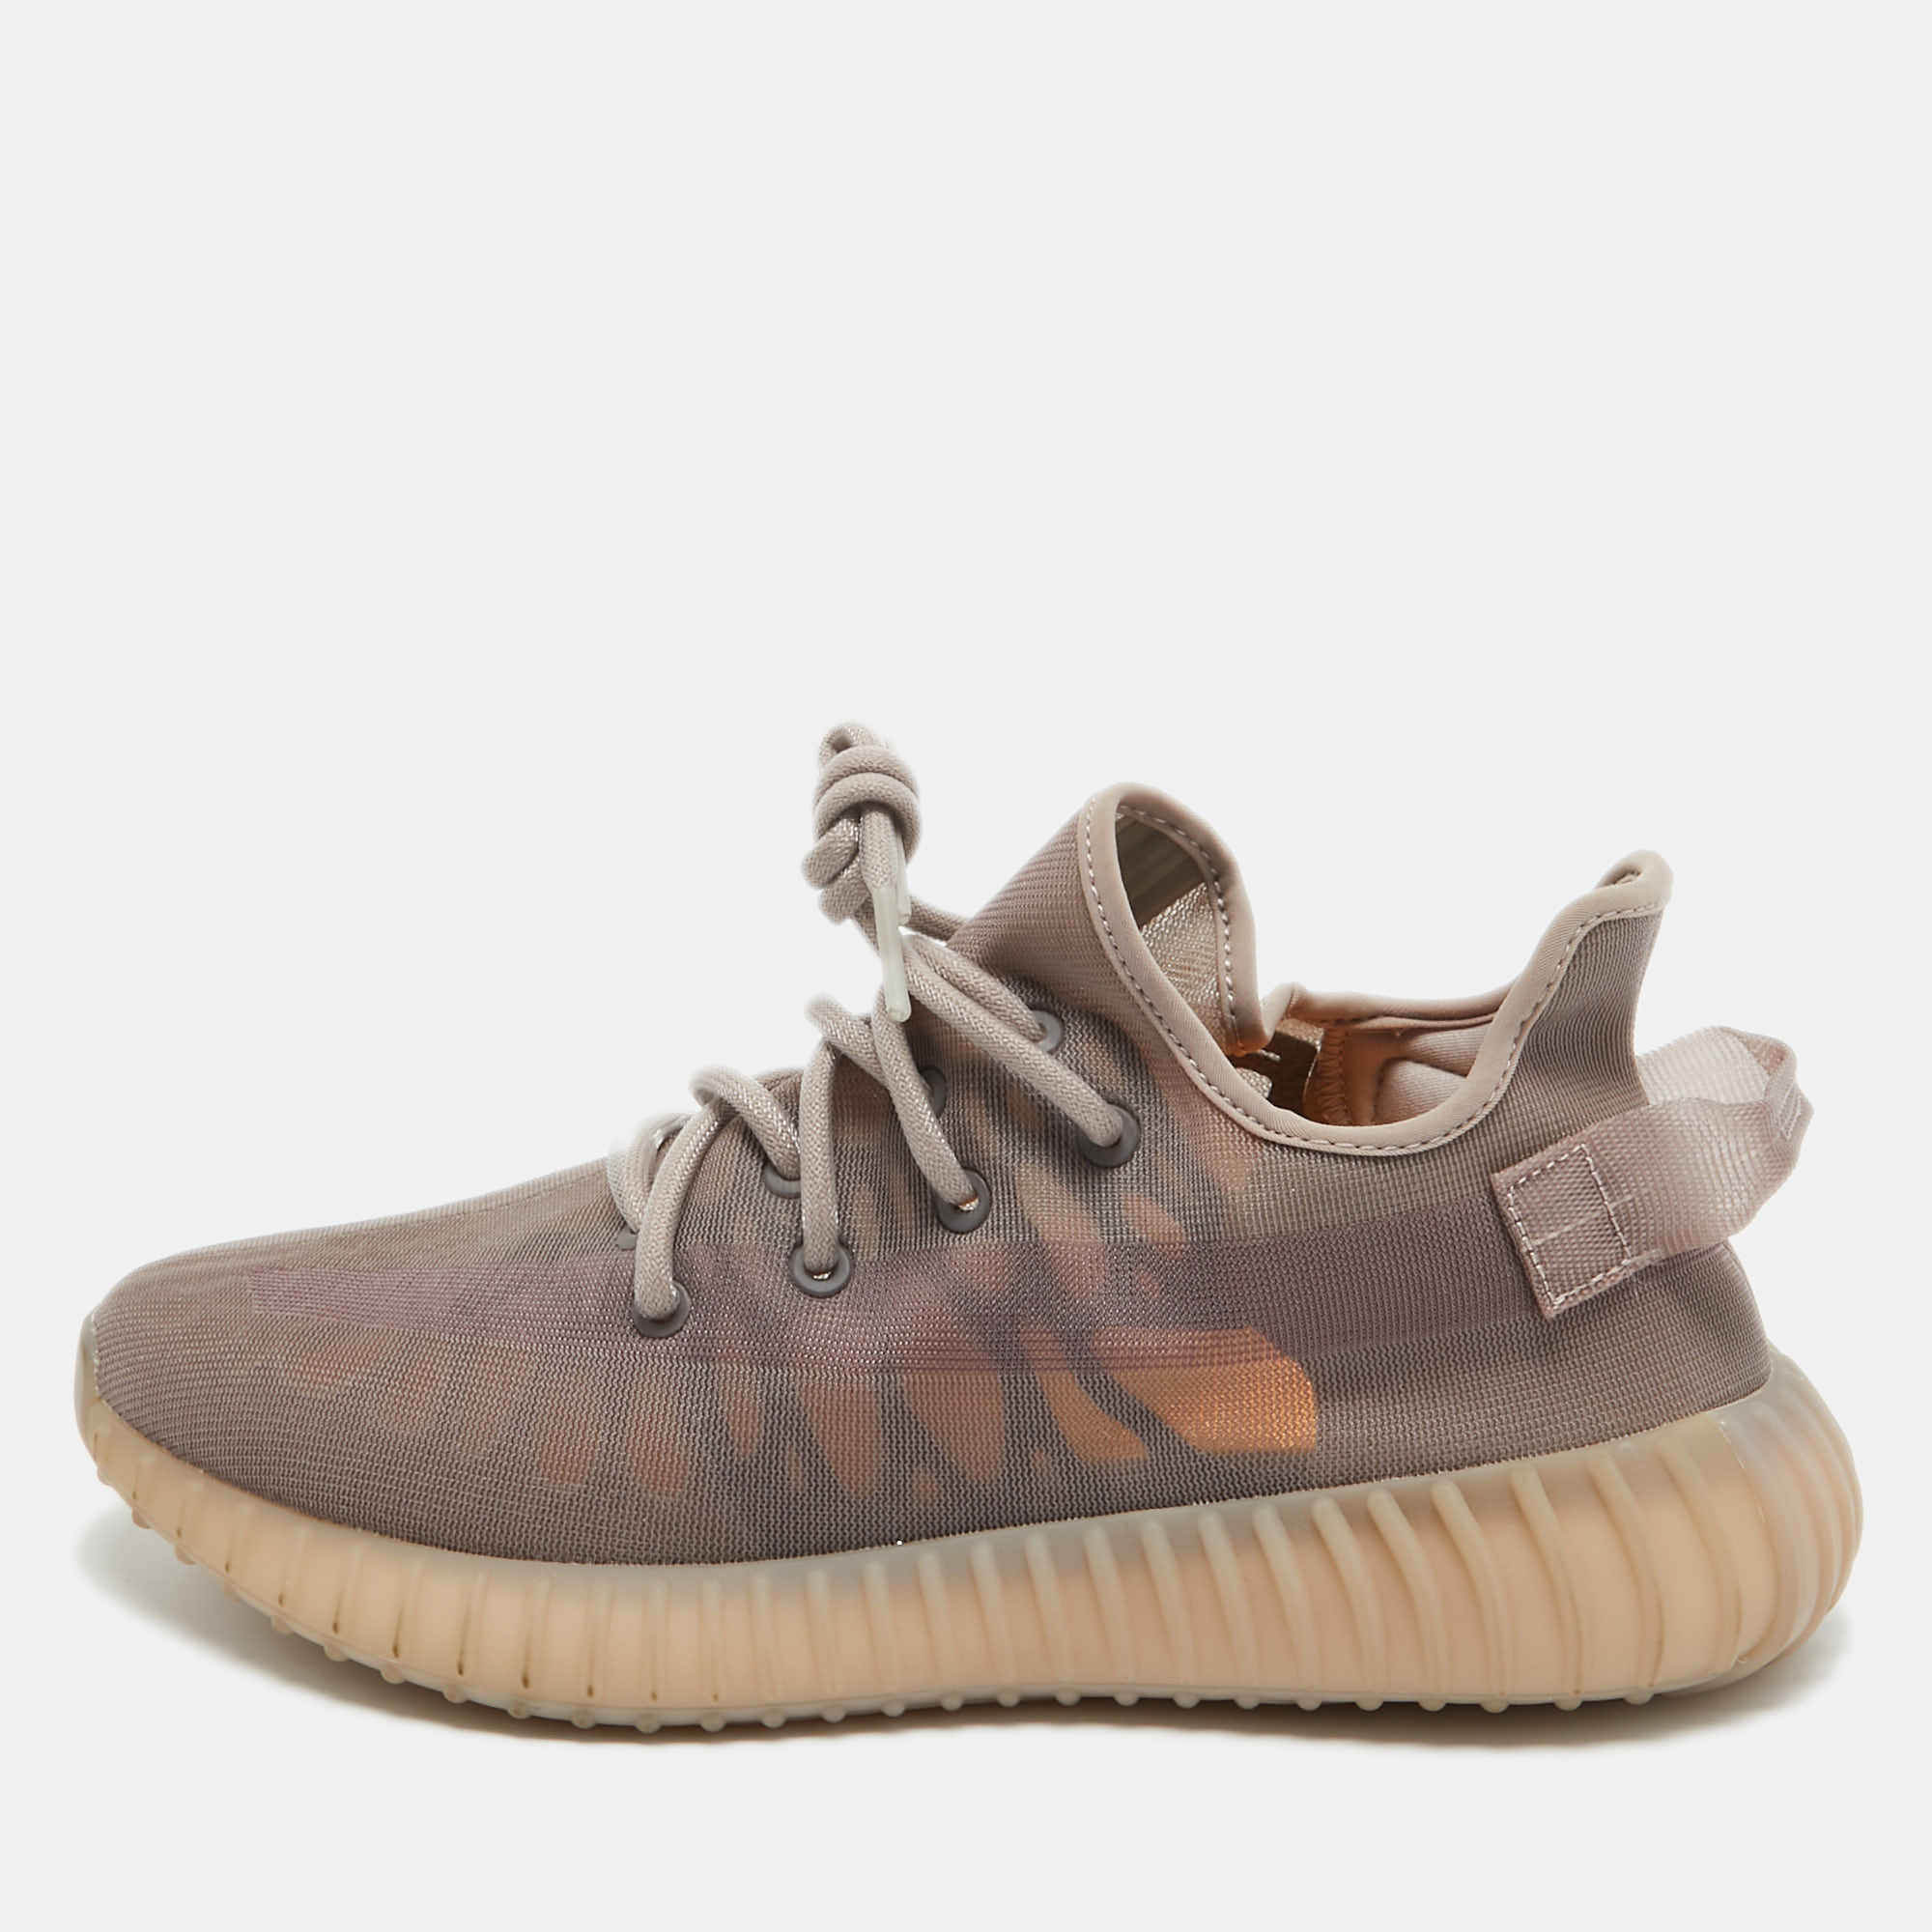 Yeezy x adidas brown mesh boost 350 v2 mono mist sneakers size 42 1/3